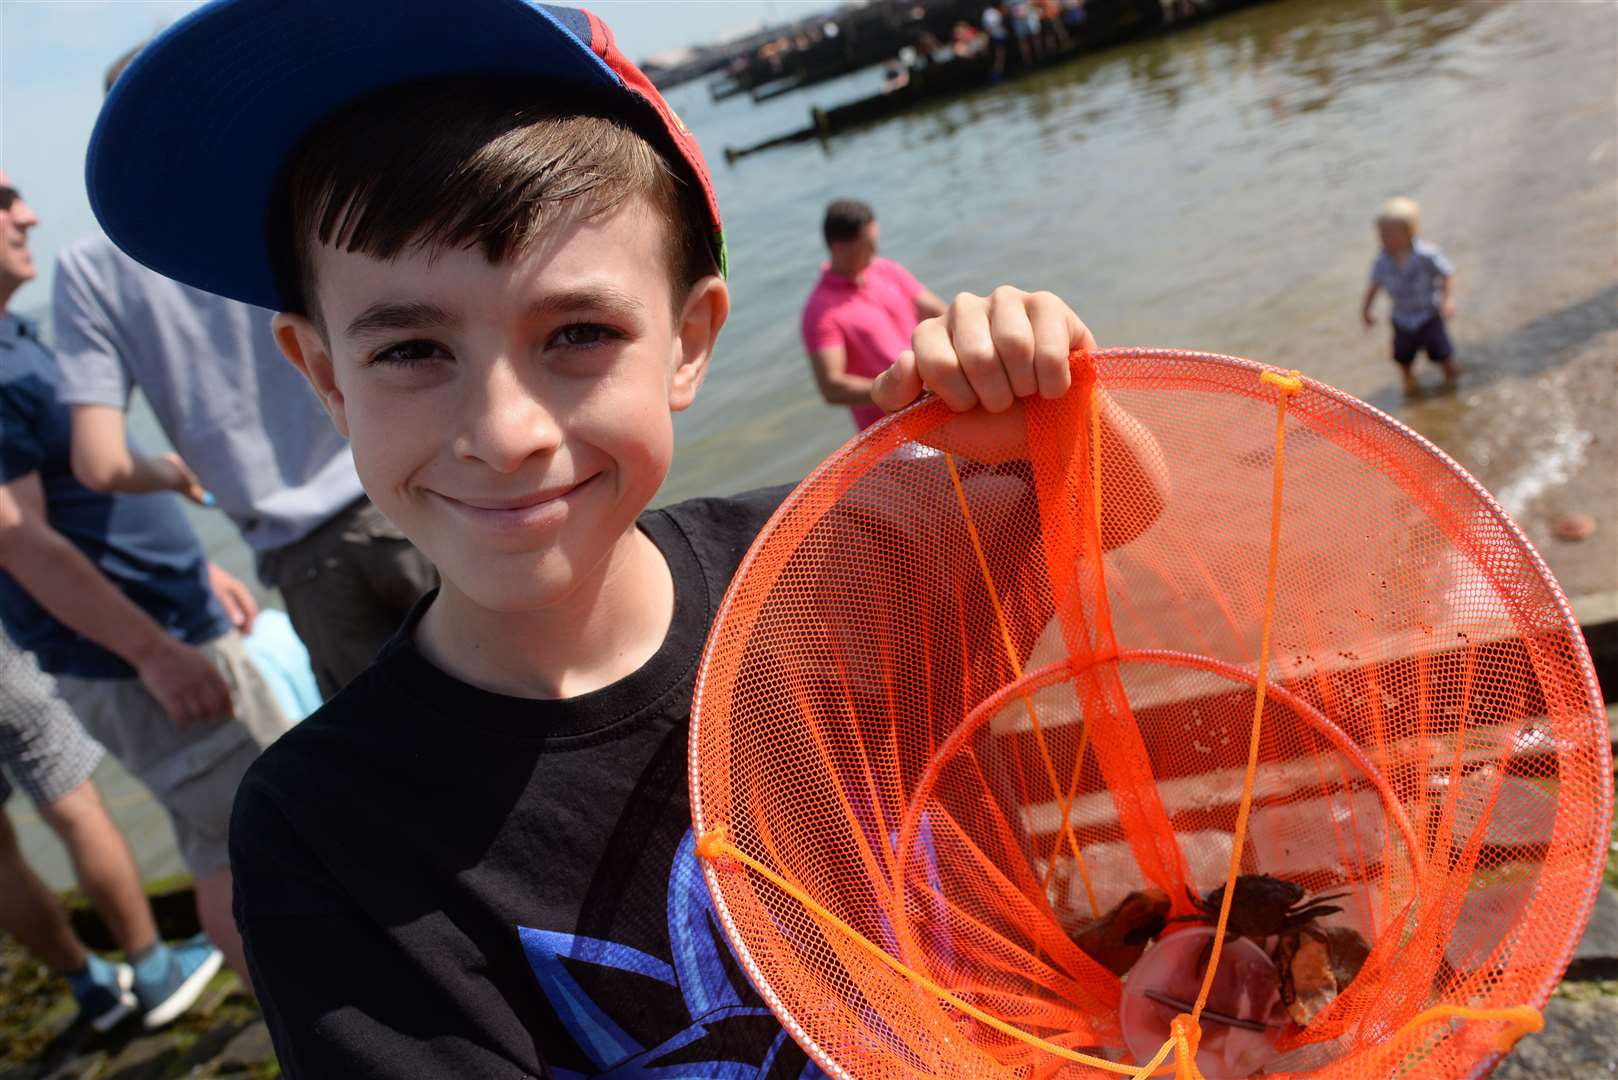 Lots of fun for the kids including the Oyster Festival Crab Catching Competition